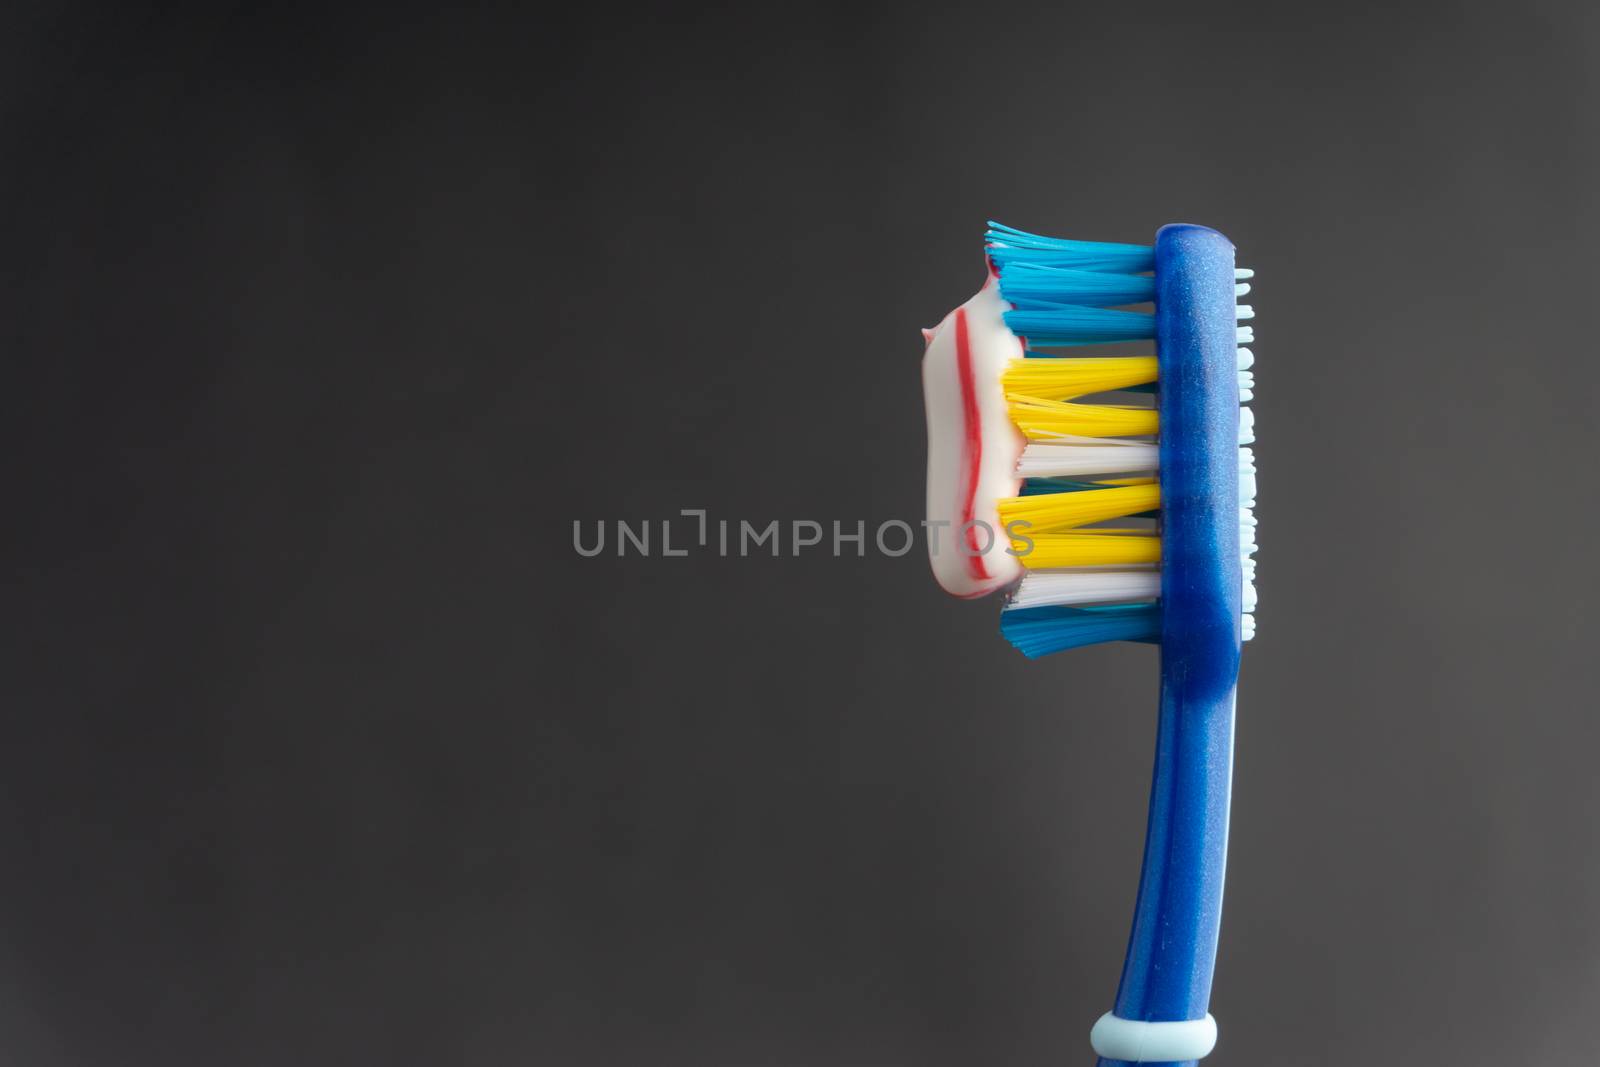 Toothbrush closeup on white background. Healthy concept by silverwings